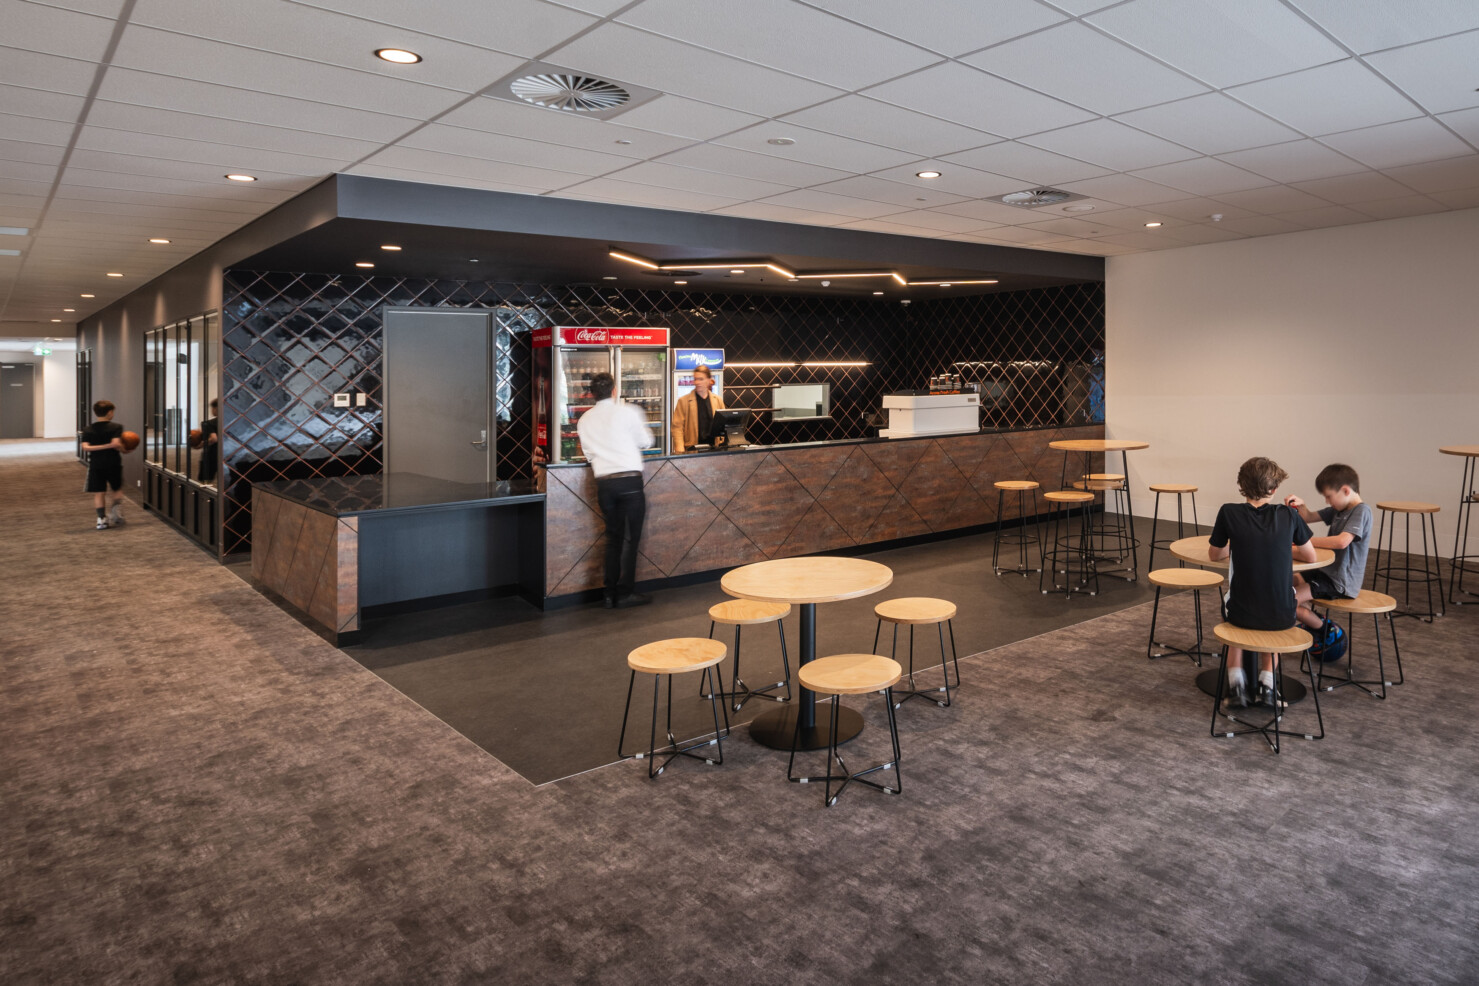 The cafe and bar in the spectator foyer provides seating and refreshments for the public. A person serves a customer from the counter. Two young boys sit at the cafe tables enjoying a soft drink. Another young person walks up the corridor holding a basketball. The bar features black gloss tiling.